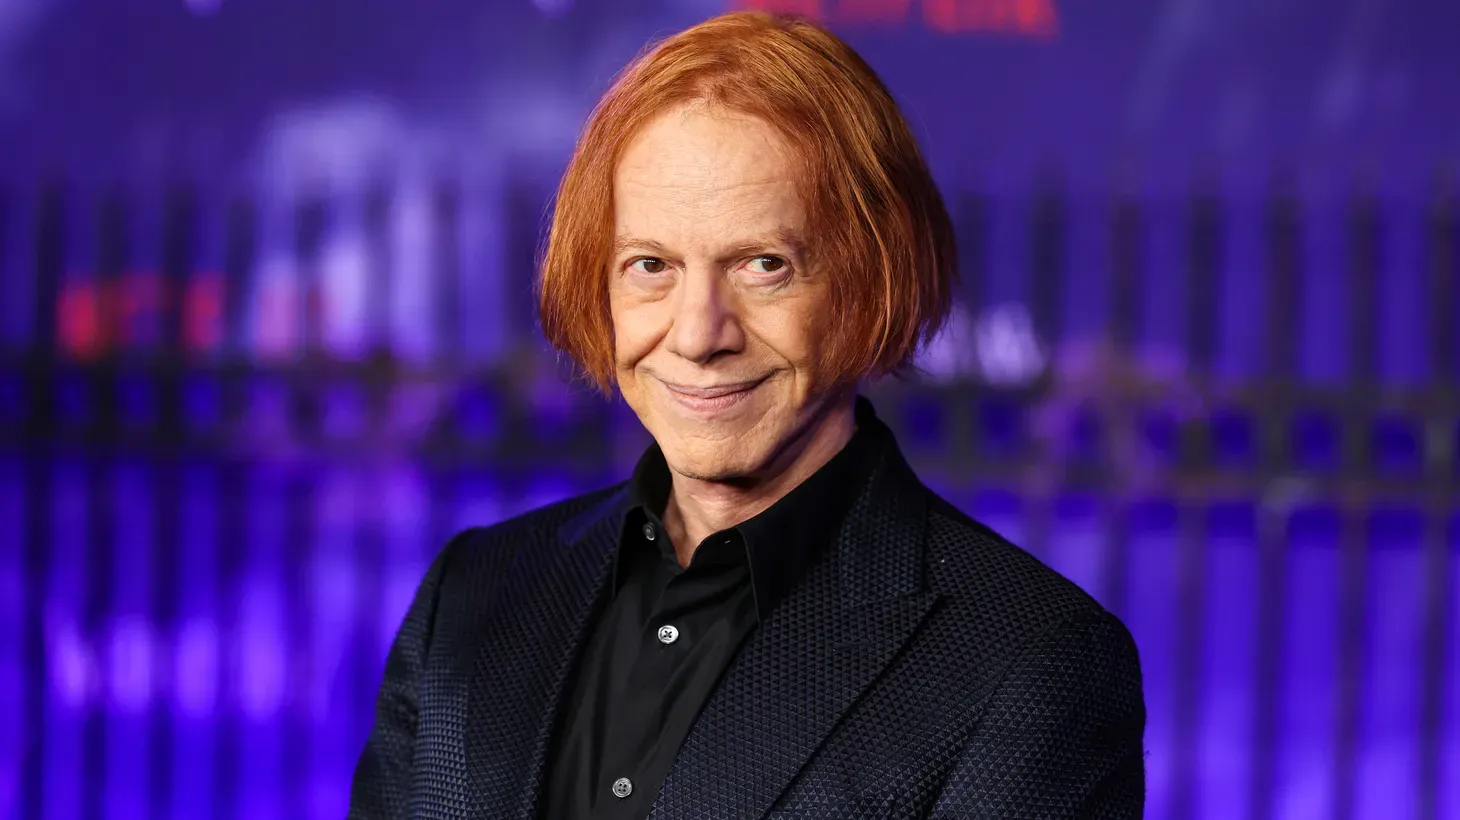 American film composer, singer, and songwriter Danny Elfman arrives at the world premiere of Netflix's “Wednesday” held at the Hollywood Legion Theater on November 16, 2022 in Los Angeles, California, United States.